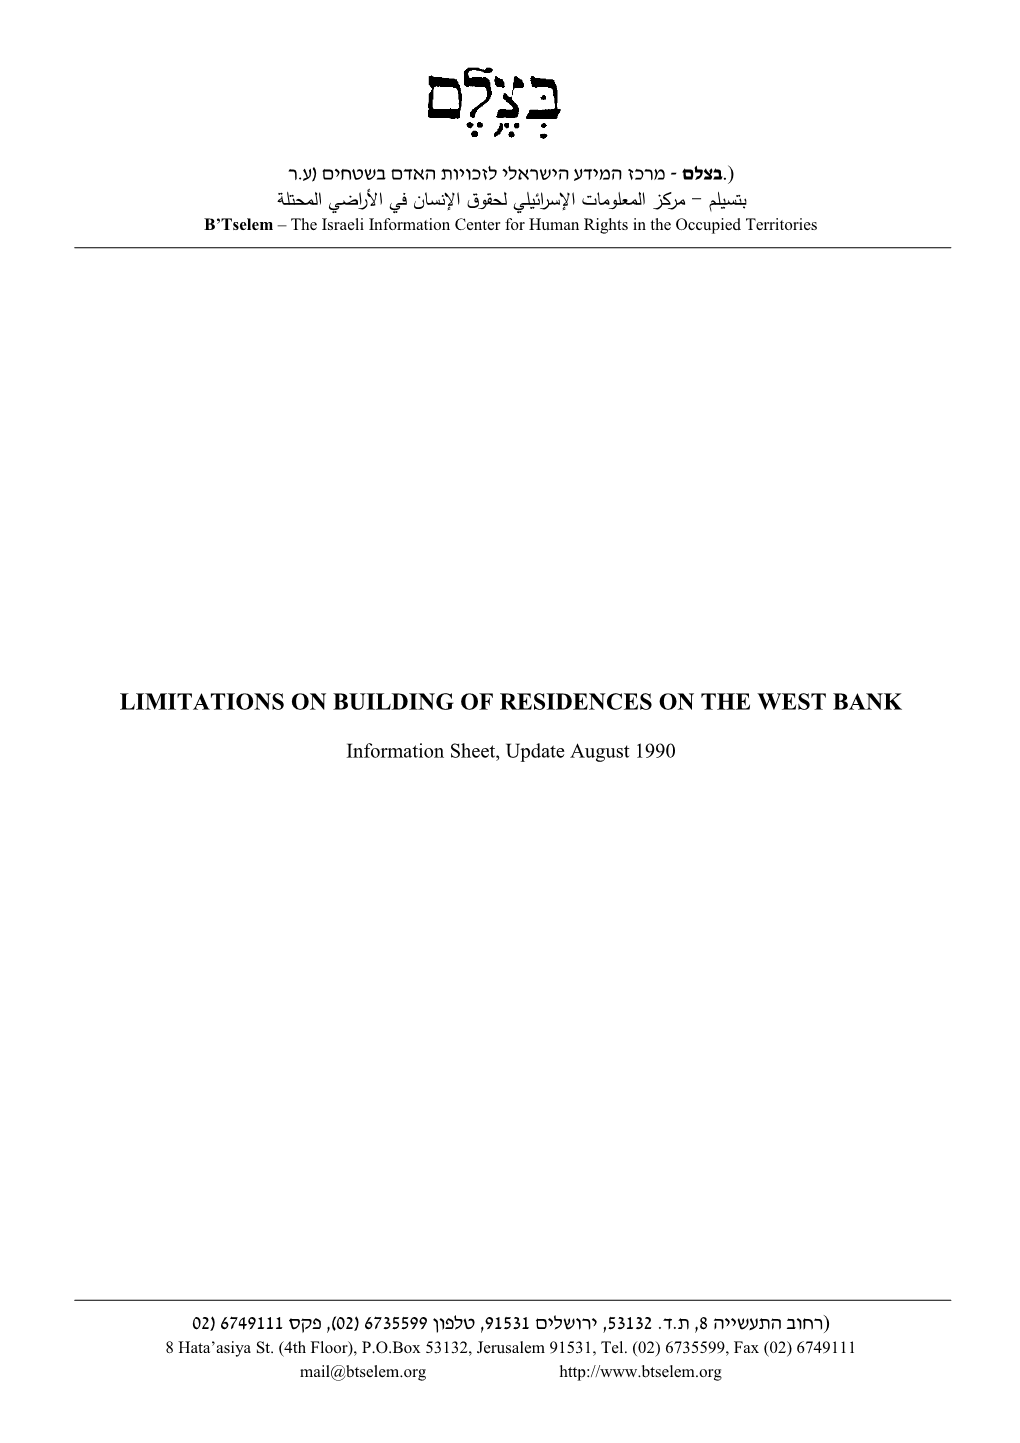 B'tselem Report: Limitations on Building of Residences on the West Bank, Information Sheet